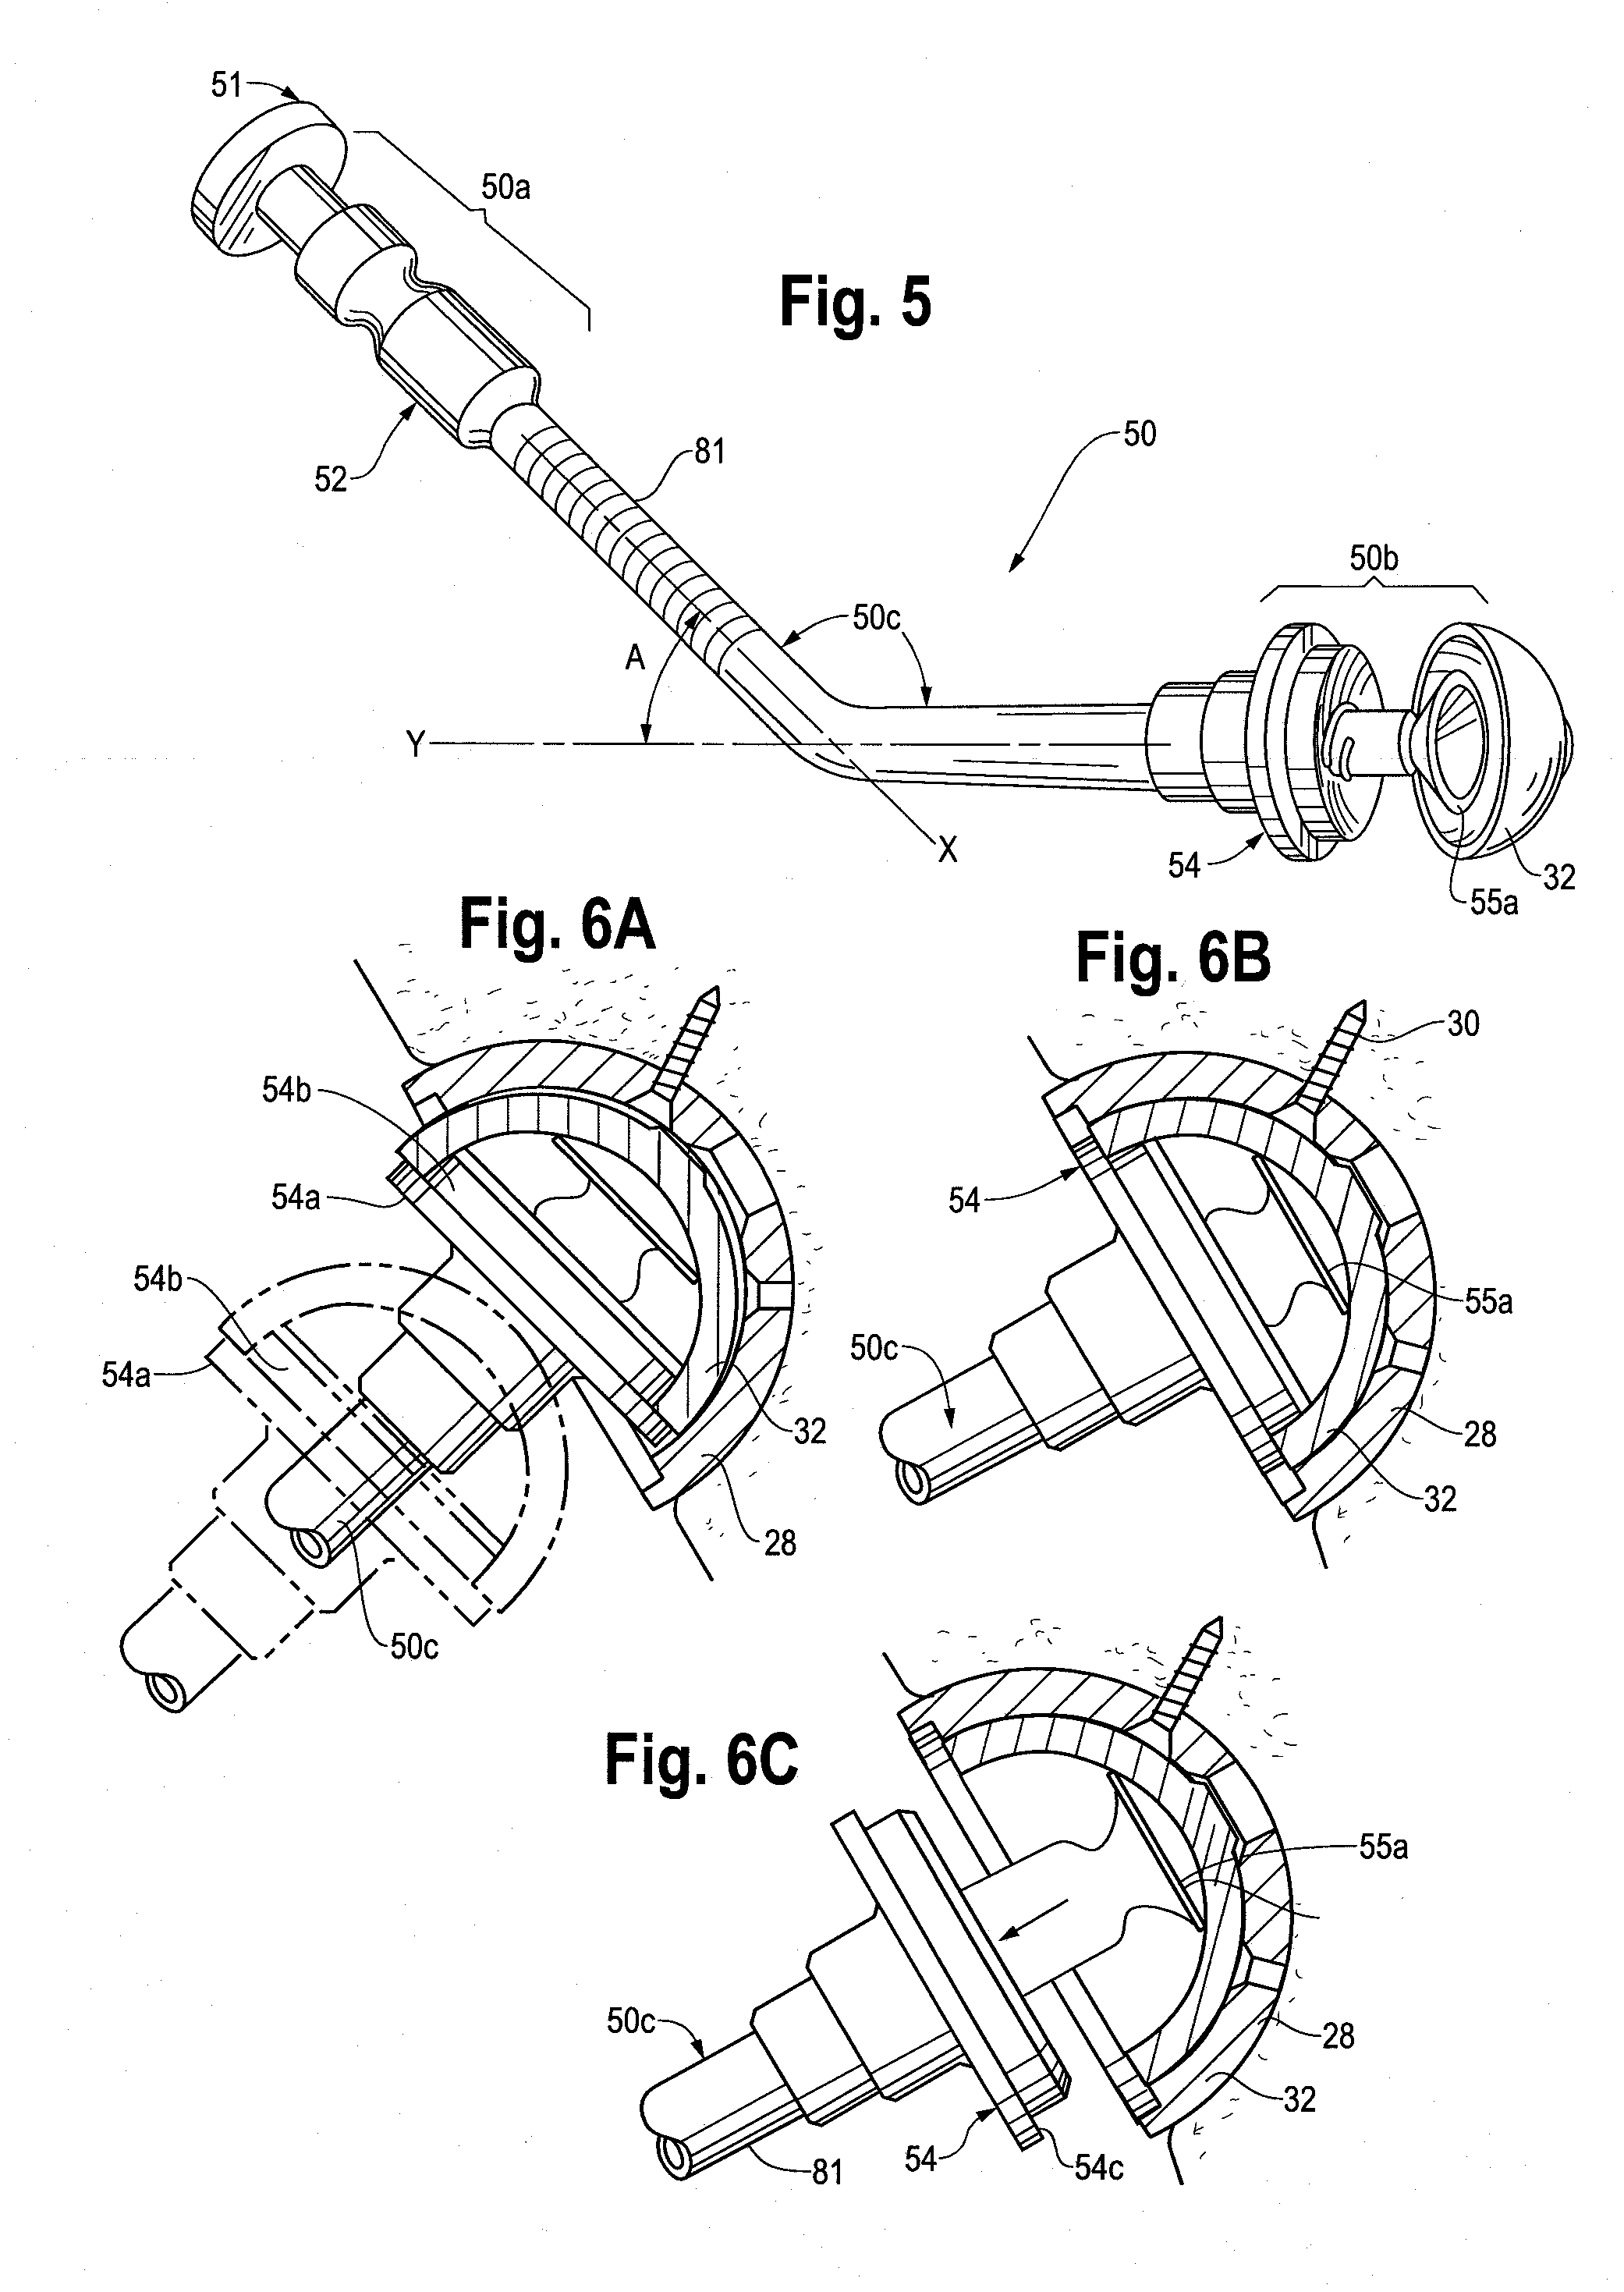 Surgical insertion device for use in orthopedic surgery